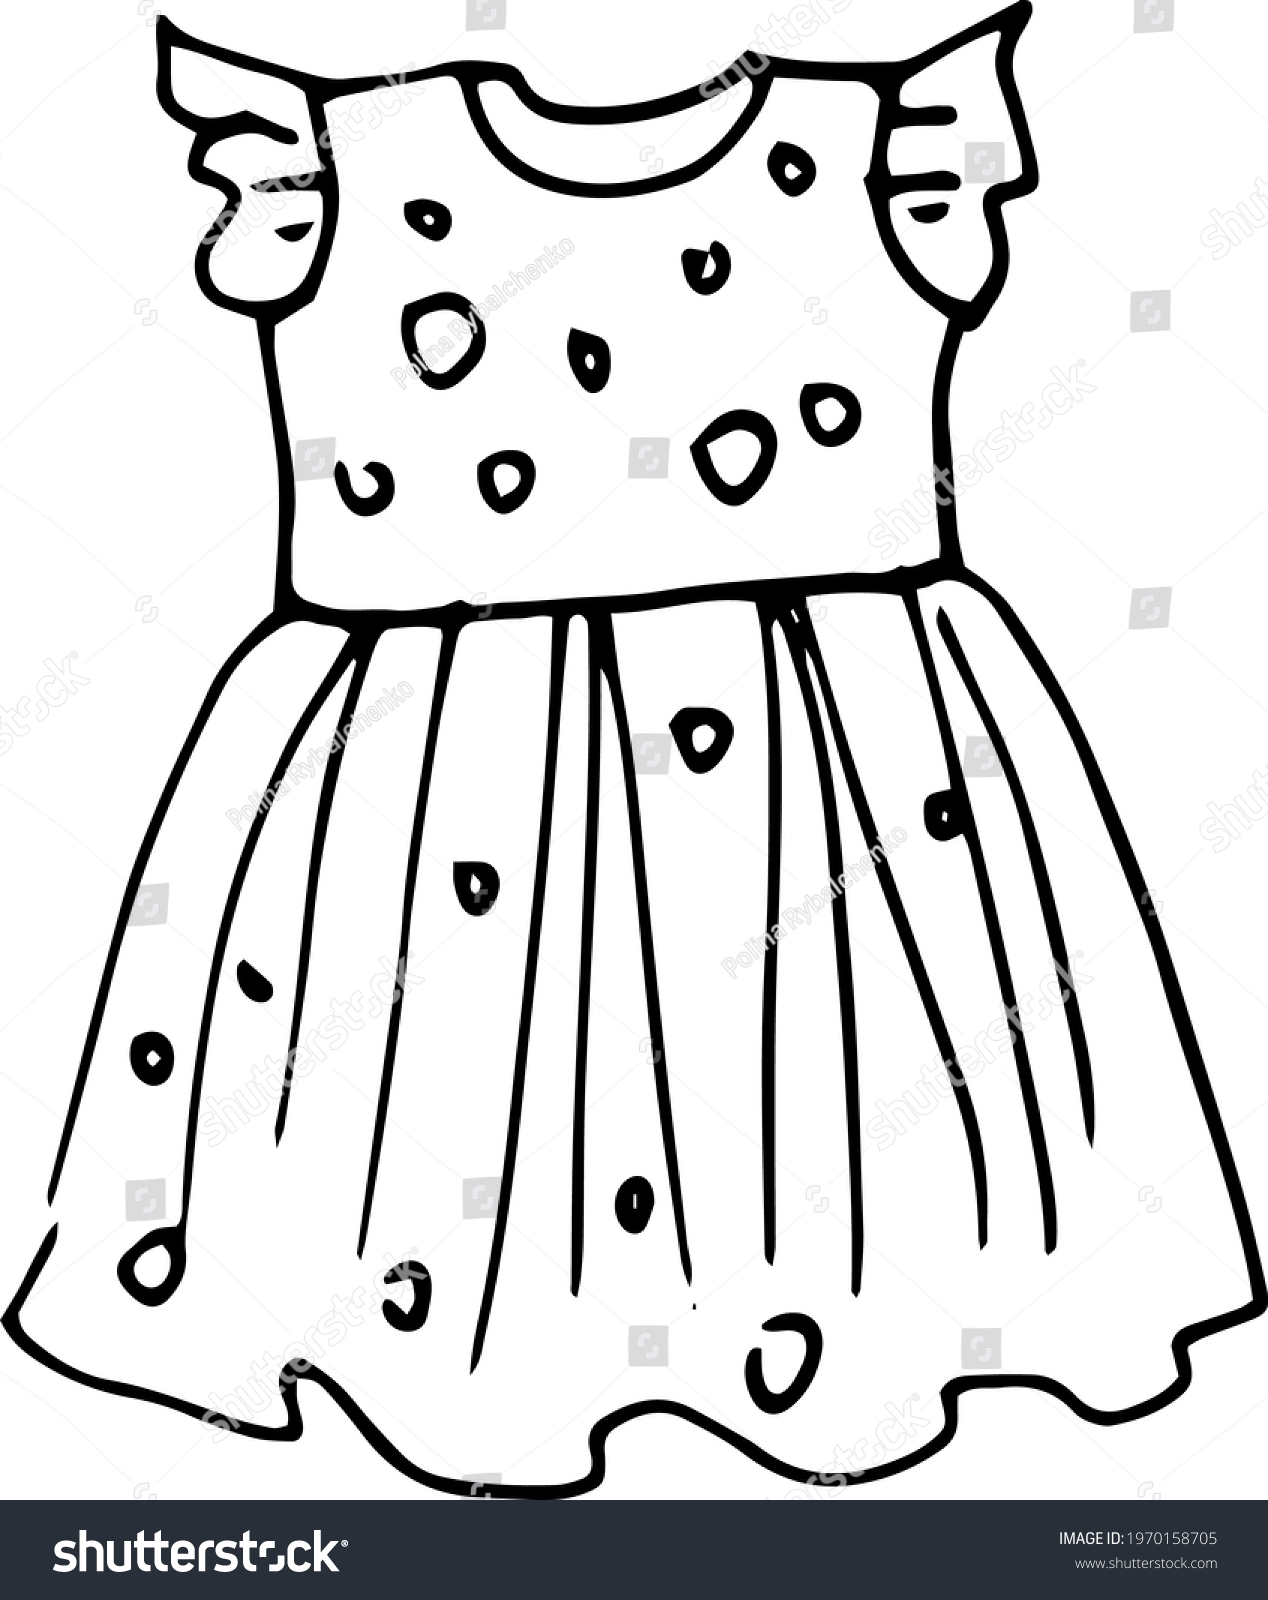 Childrens Dress Doodle Sketch Drawing By Stock Vector (Royalty Free) 1970158705 | Shutterstock